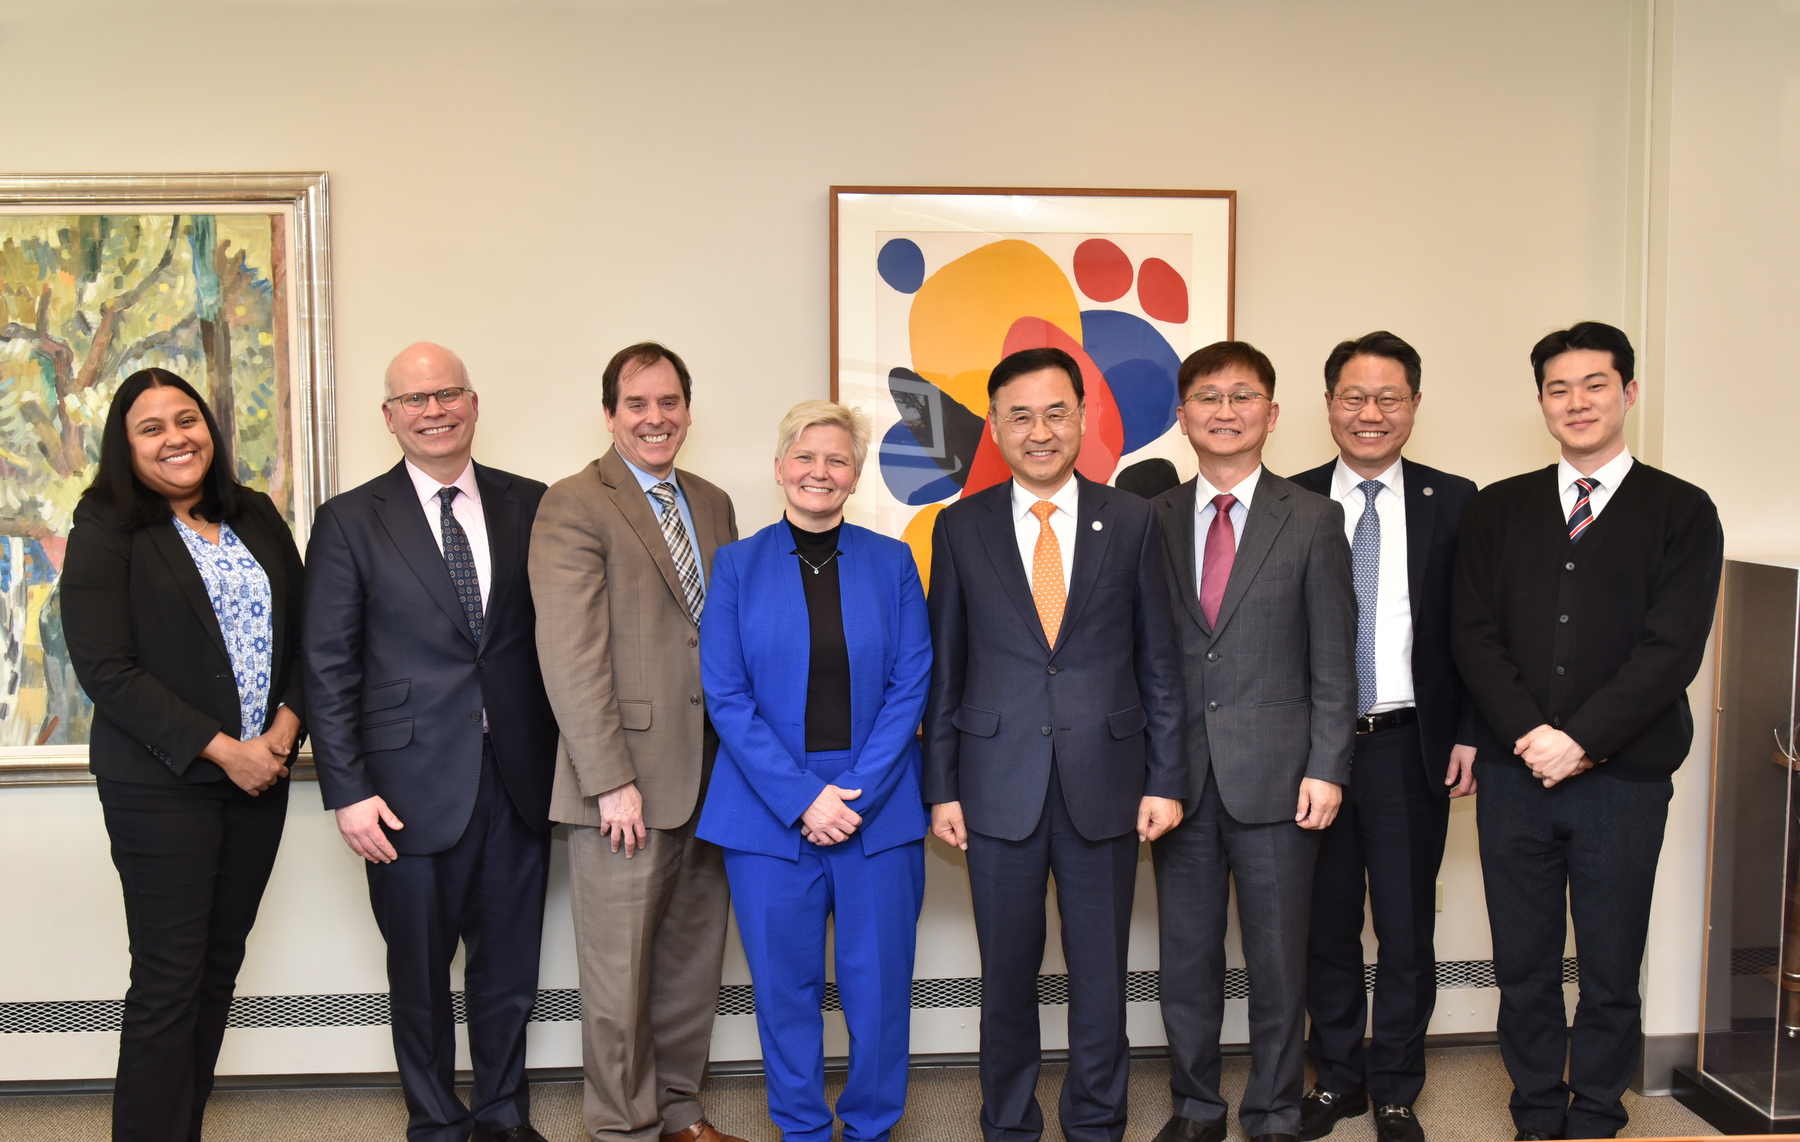 Two universities solidified a new exchange and academic partnership between SUNY Oswego and Pusan National University (PNU) in South Korea, as visiting delegates met with some key administrators during their visit to Oswego on March 30. P